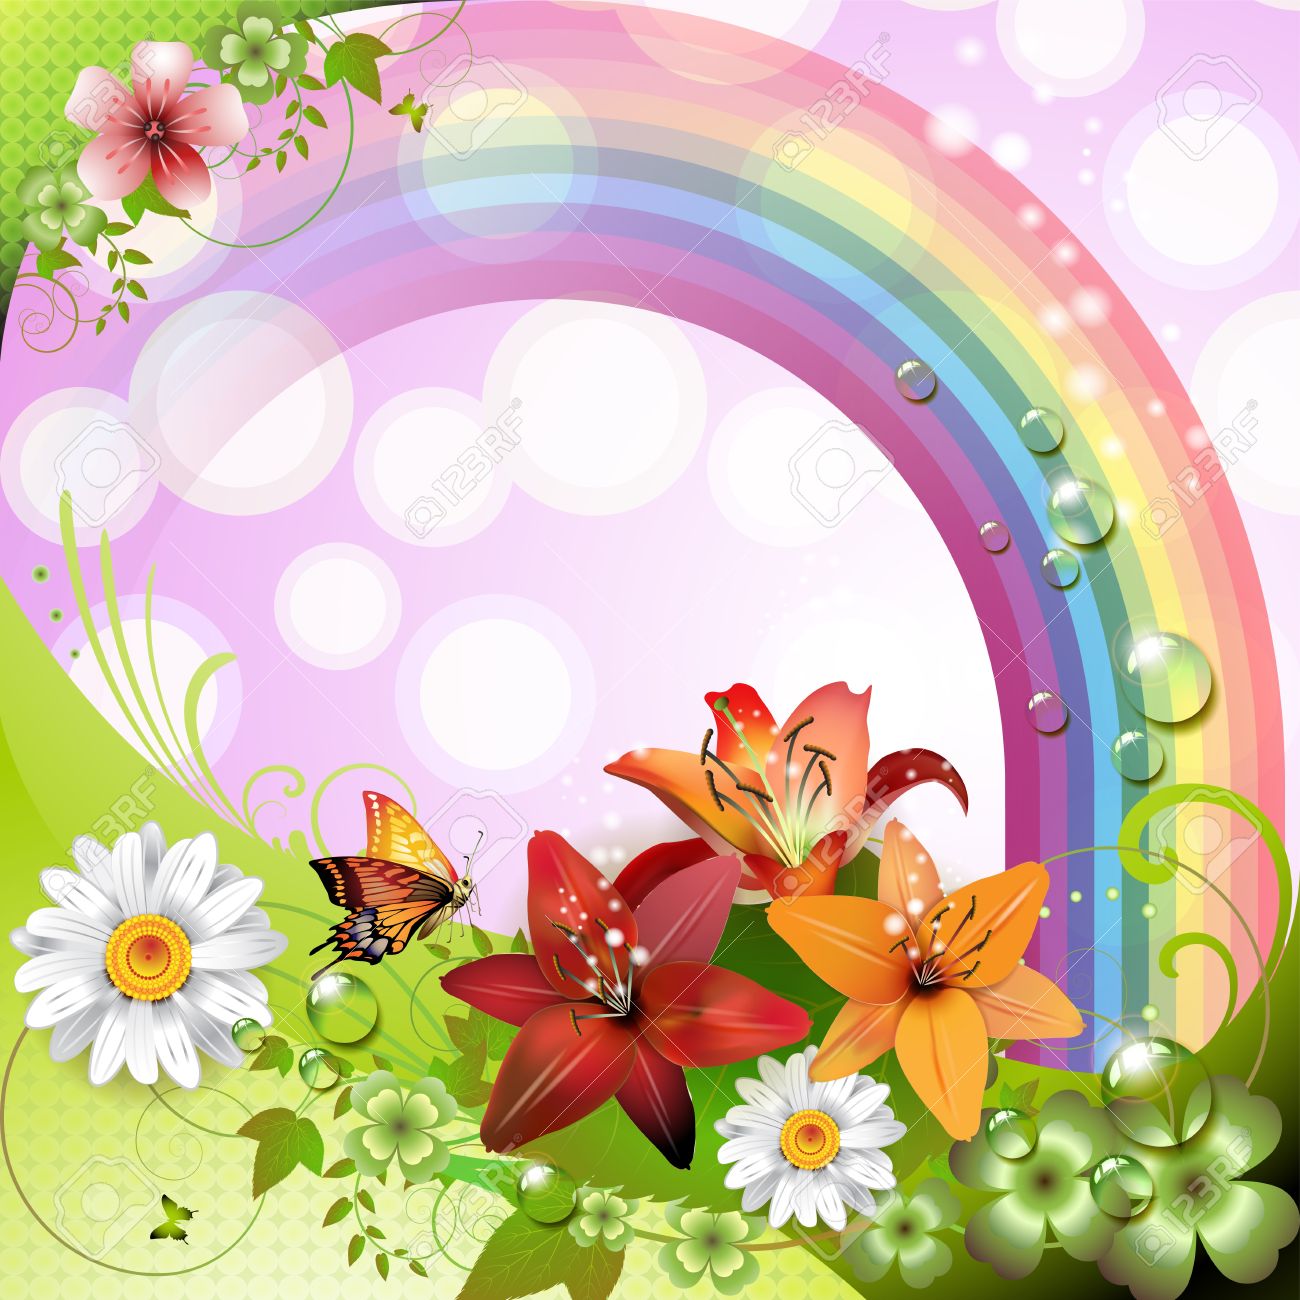 Springtime Background With Flowers And Butterflies Royalty Free